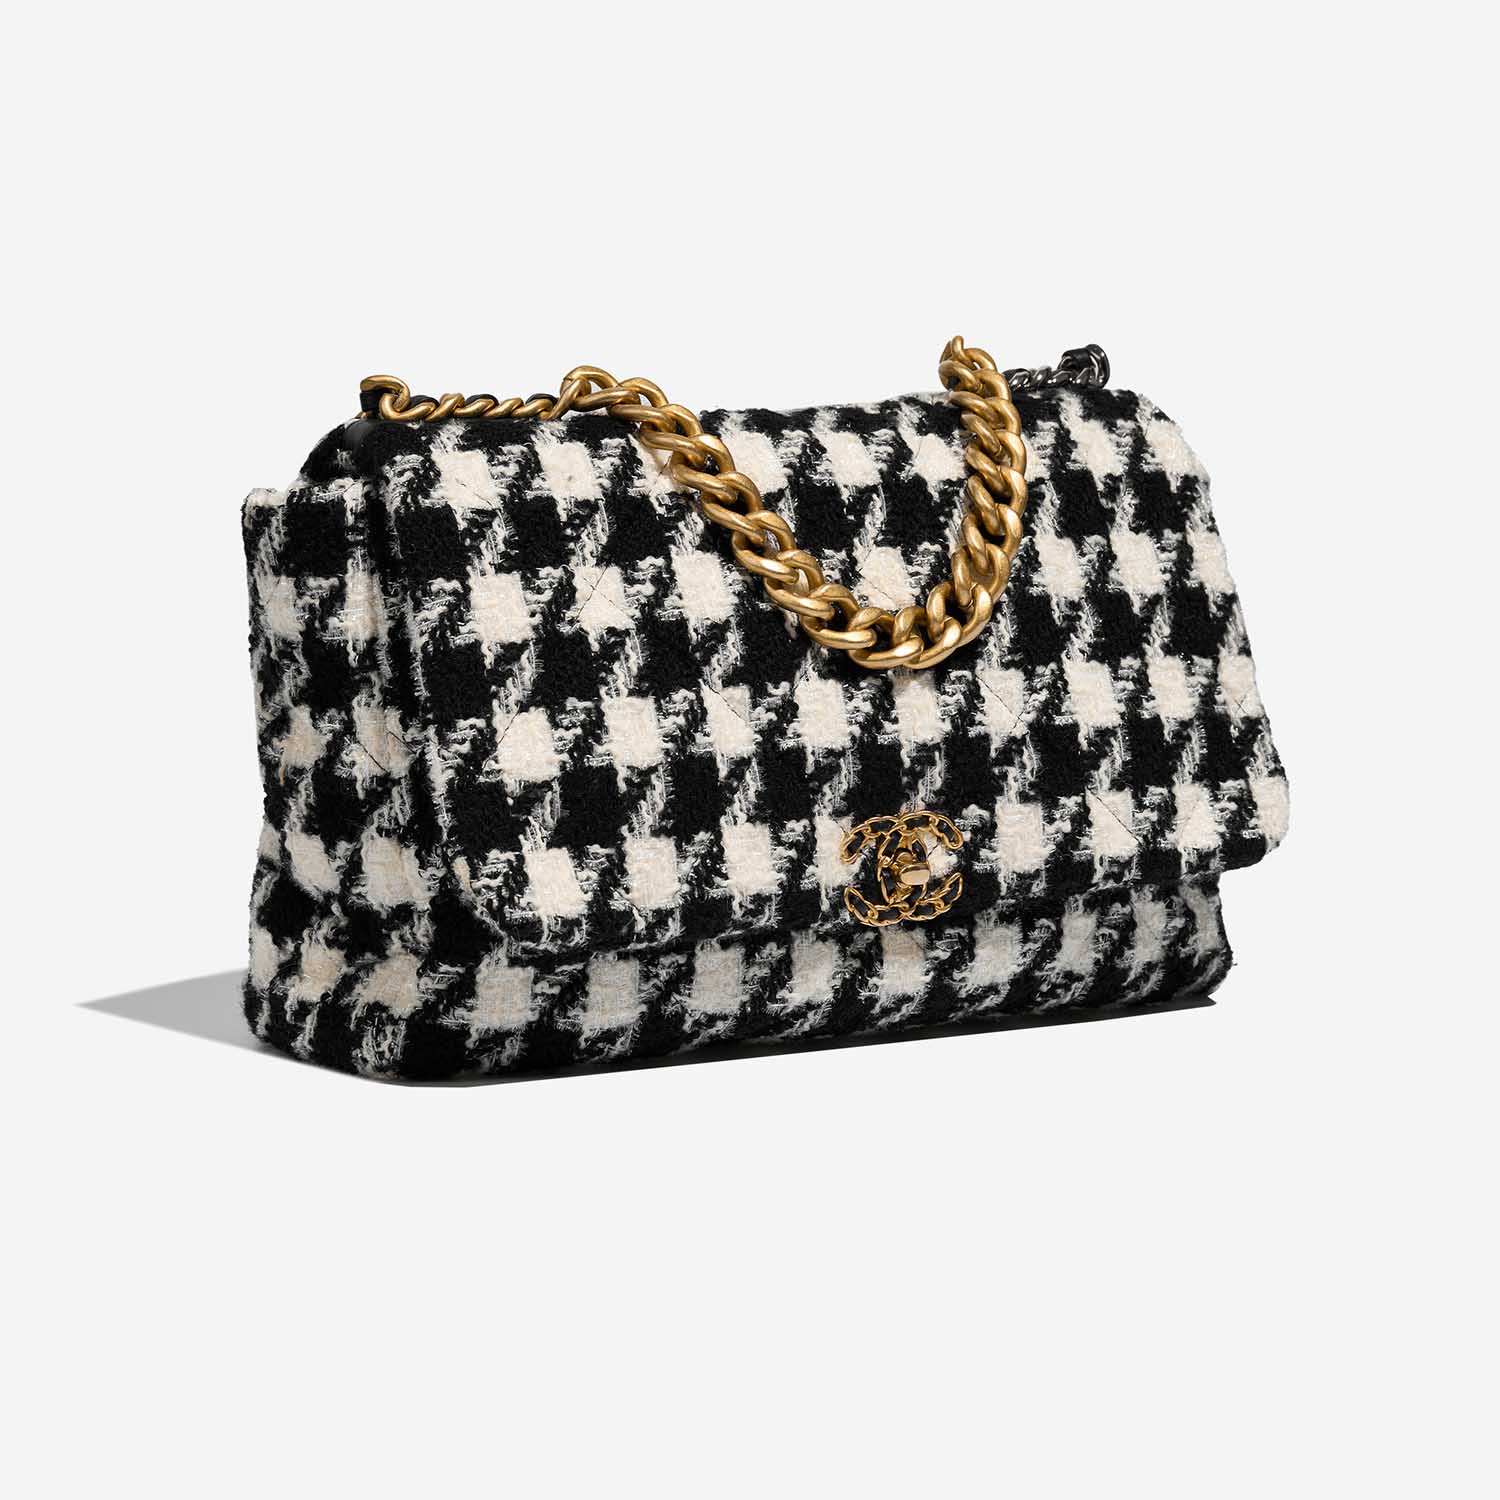 Pre-owned Chanel bag 19 Flap Bag Maxi Tweed Black / White Black, Multicolour, White | Sell your designer bag on Saclab.com